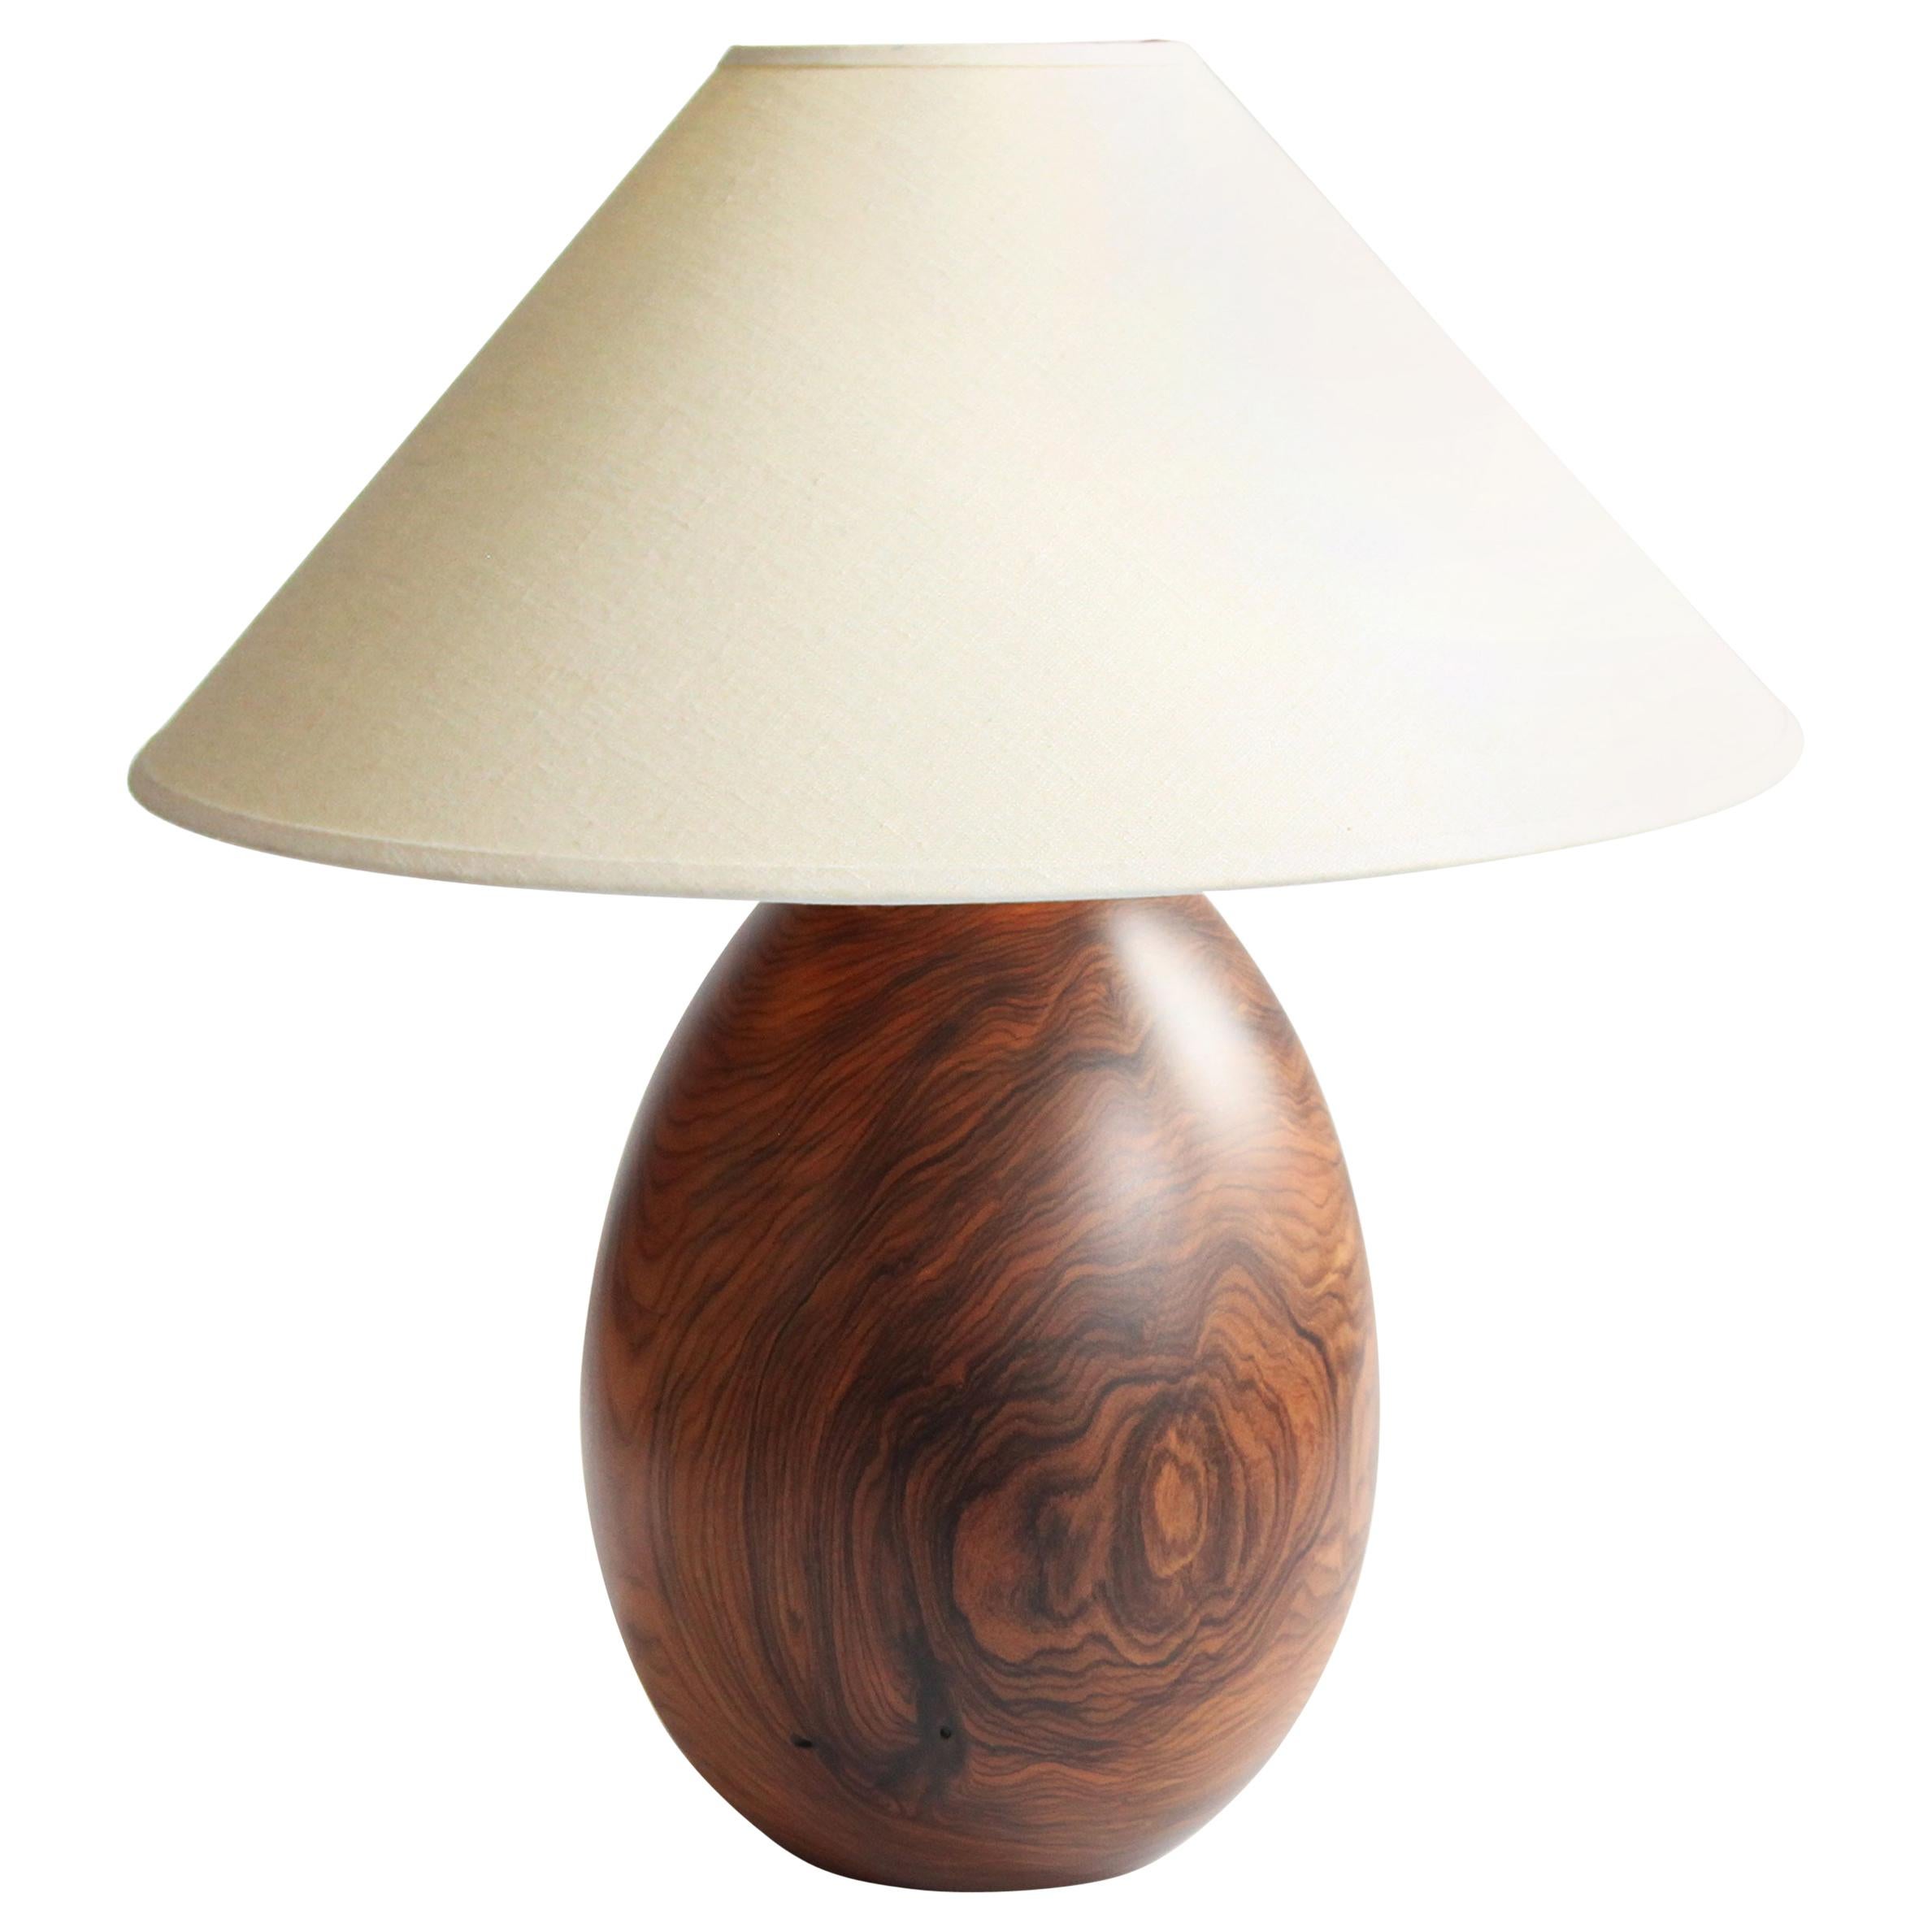 Tropical Hardwood Lamp and White Linen Shade, Medium, Árbol Collection, 26